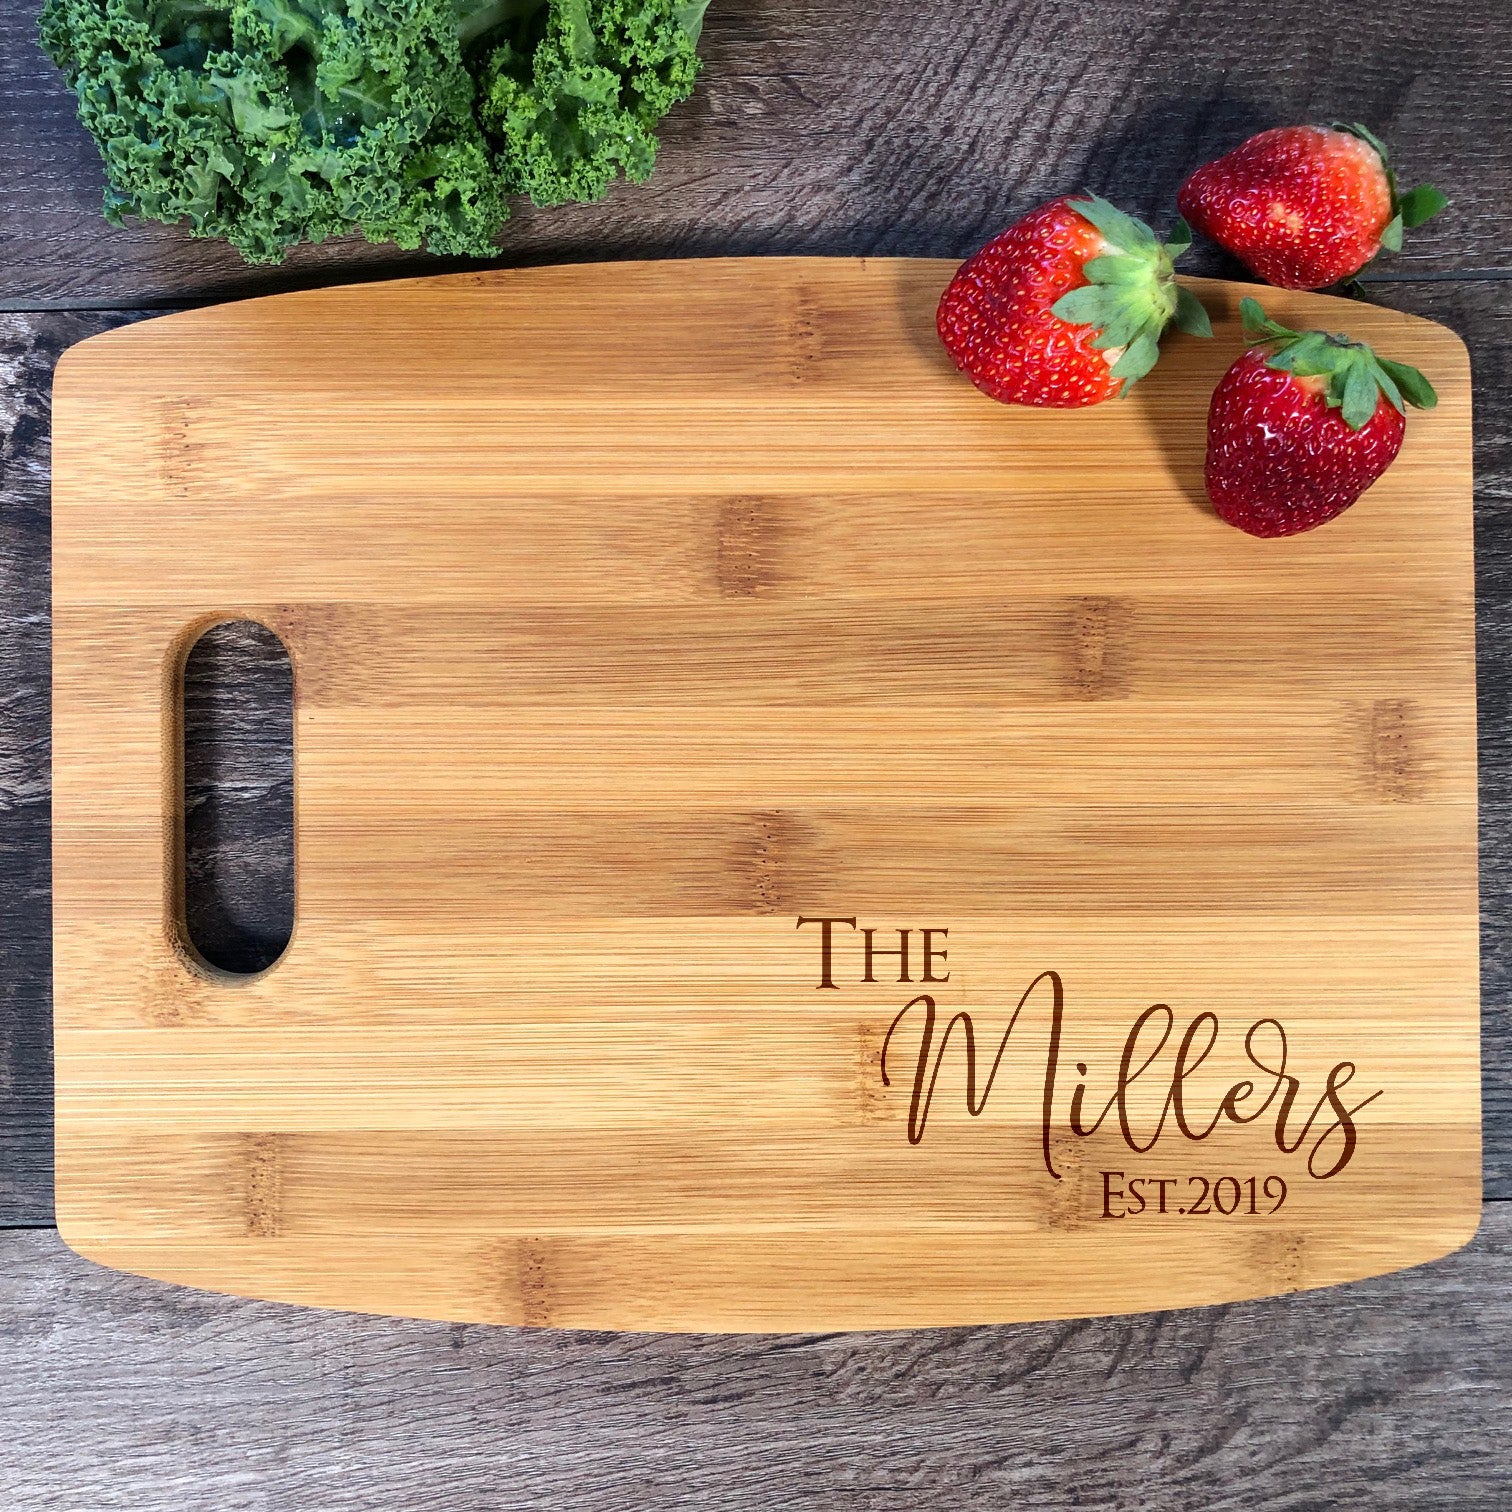 Personalized Engraved Children's Wood Cutting Board and Knife Set. — DAZE  custom